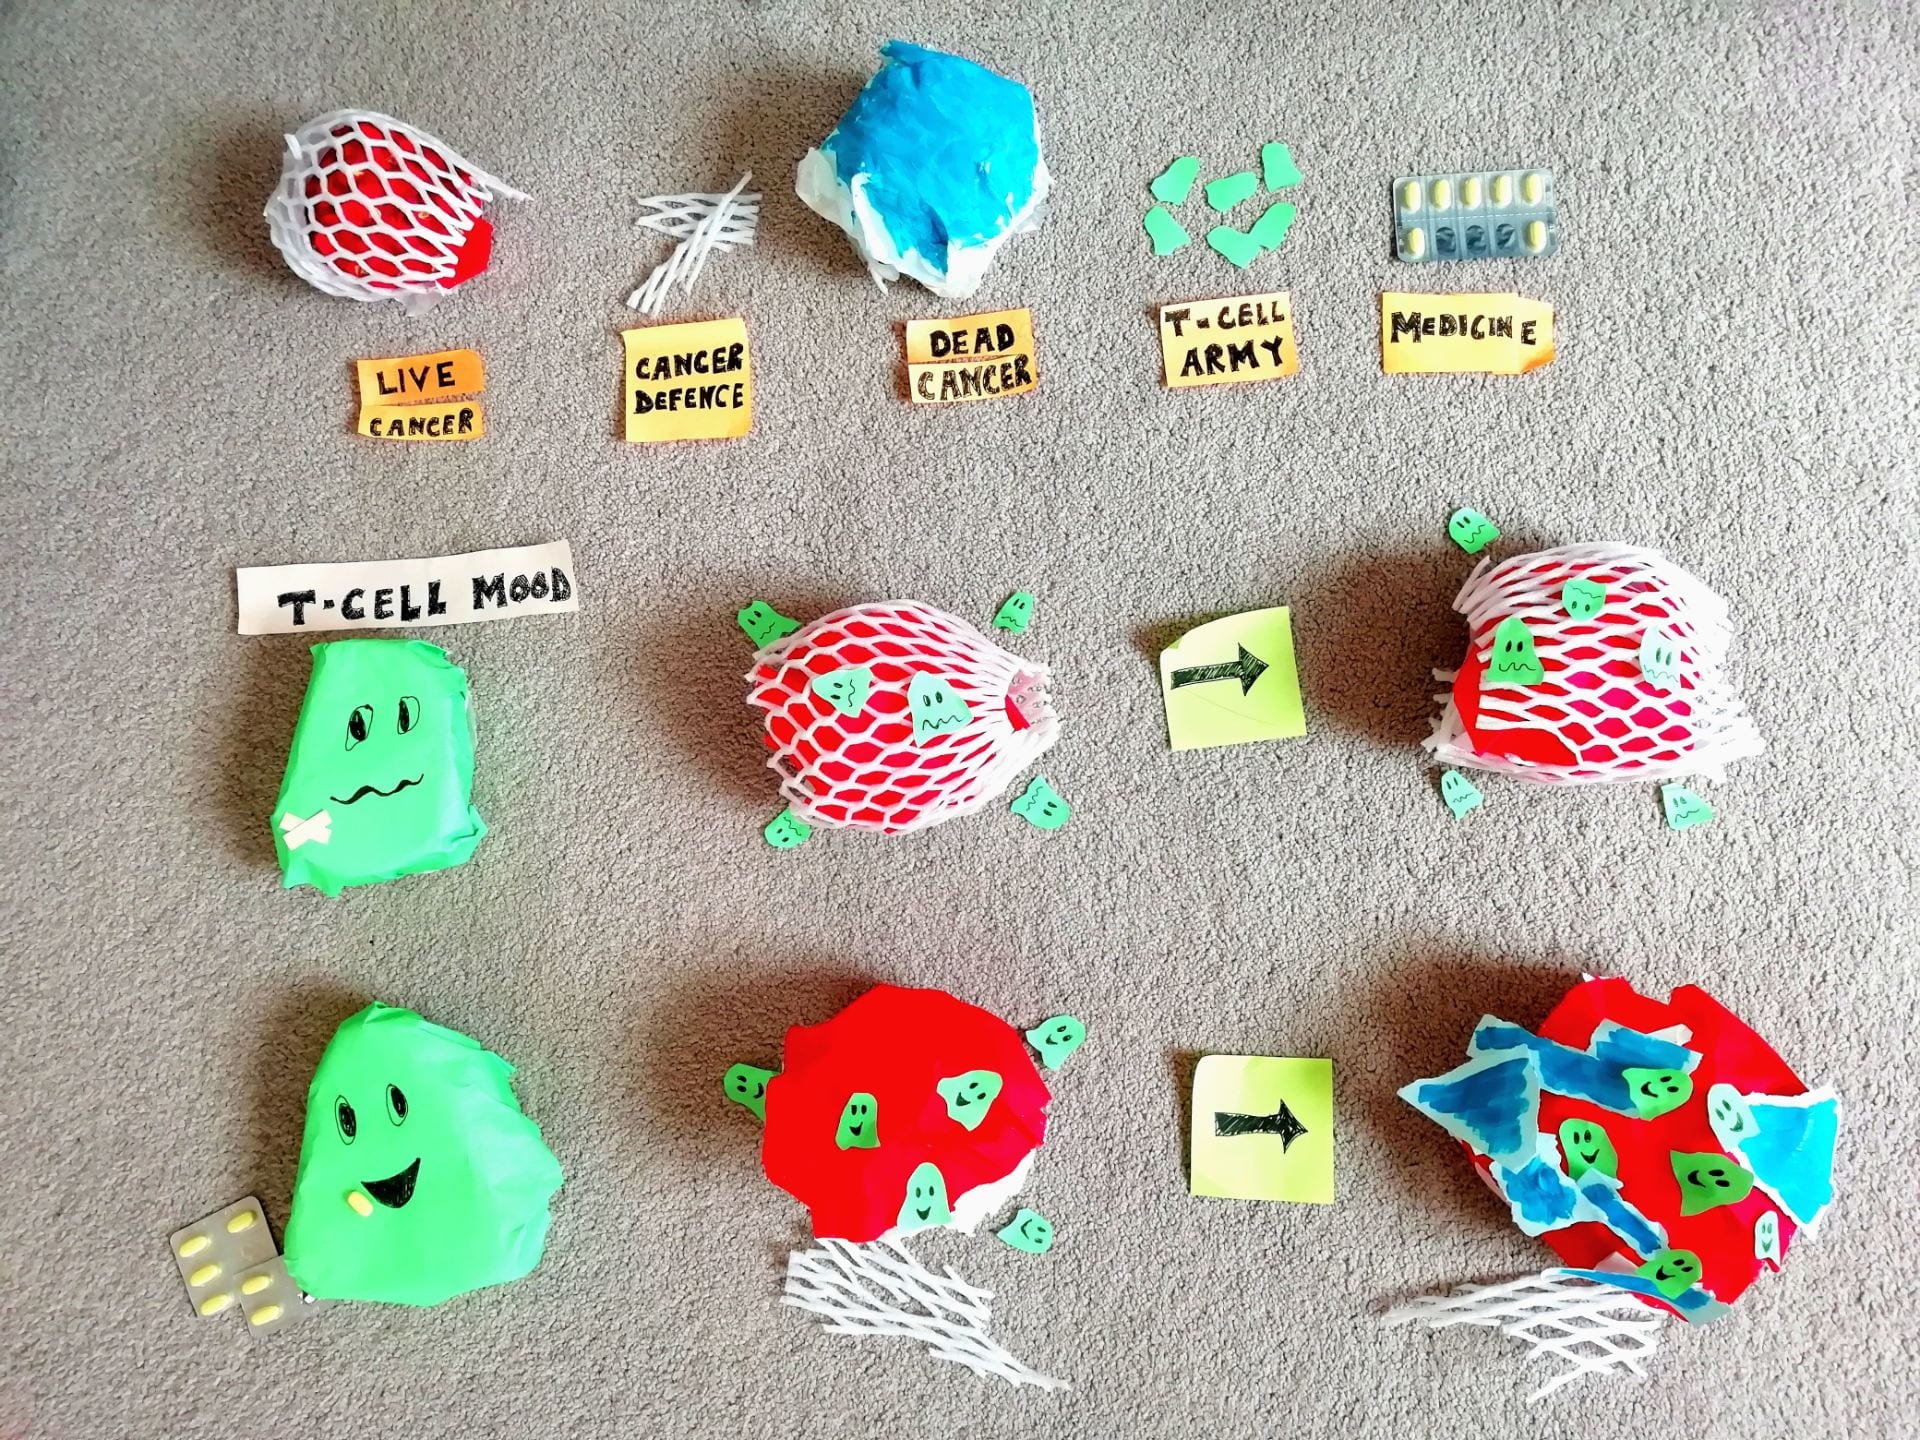 Three rows of objects. Top row: a ball in a net (labelled 'live cancer'); pieces of netting (labelled 'cancer defence'); a crumpled piece of blue paper ('dead cancer'); a small piece of paper (labelled 'T-cell army'); a packet of pills (labelled 'medicine'). Middle row: a cartoon face with an uncertain expression (labelled 'T-cell mood'); a ball in a net covered in smaller faces with the same expression; an arrow pointing right; a ball in a broken net covered in smaller faces with the same expression. Bottom row: a cartoon face with a happy expression and a small packet of pills; a red ball covered in smaller happy faces and some broken netting; an arrow pointing right; pieces of blue paper and small happy faces on top of a red ball.